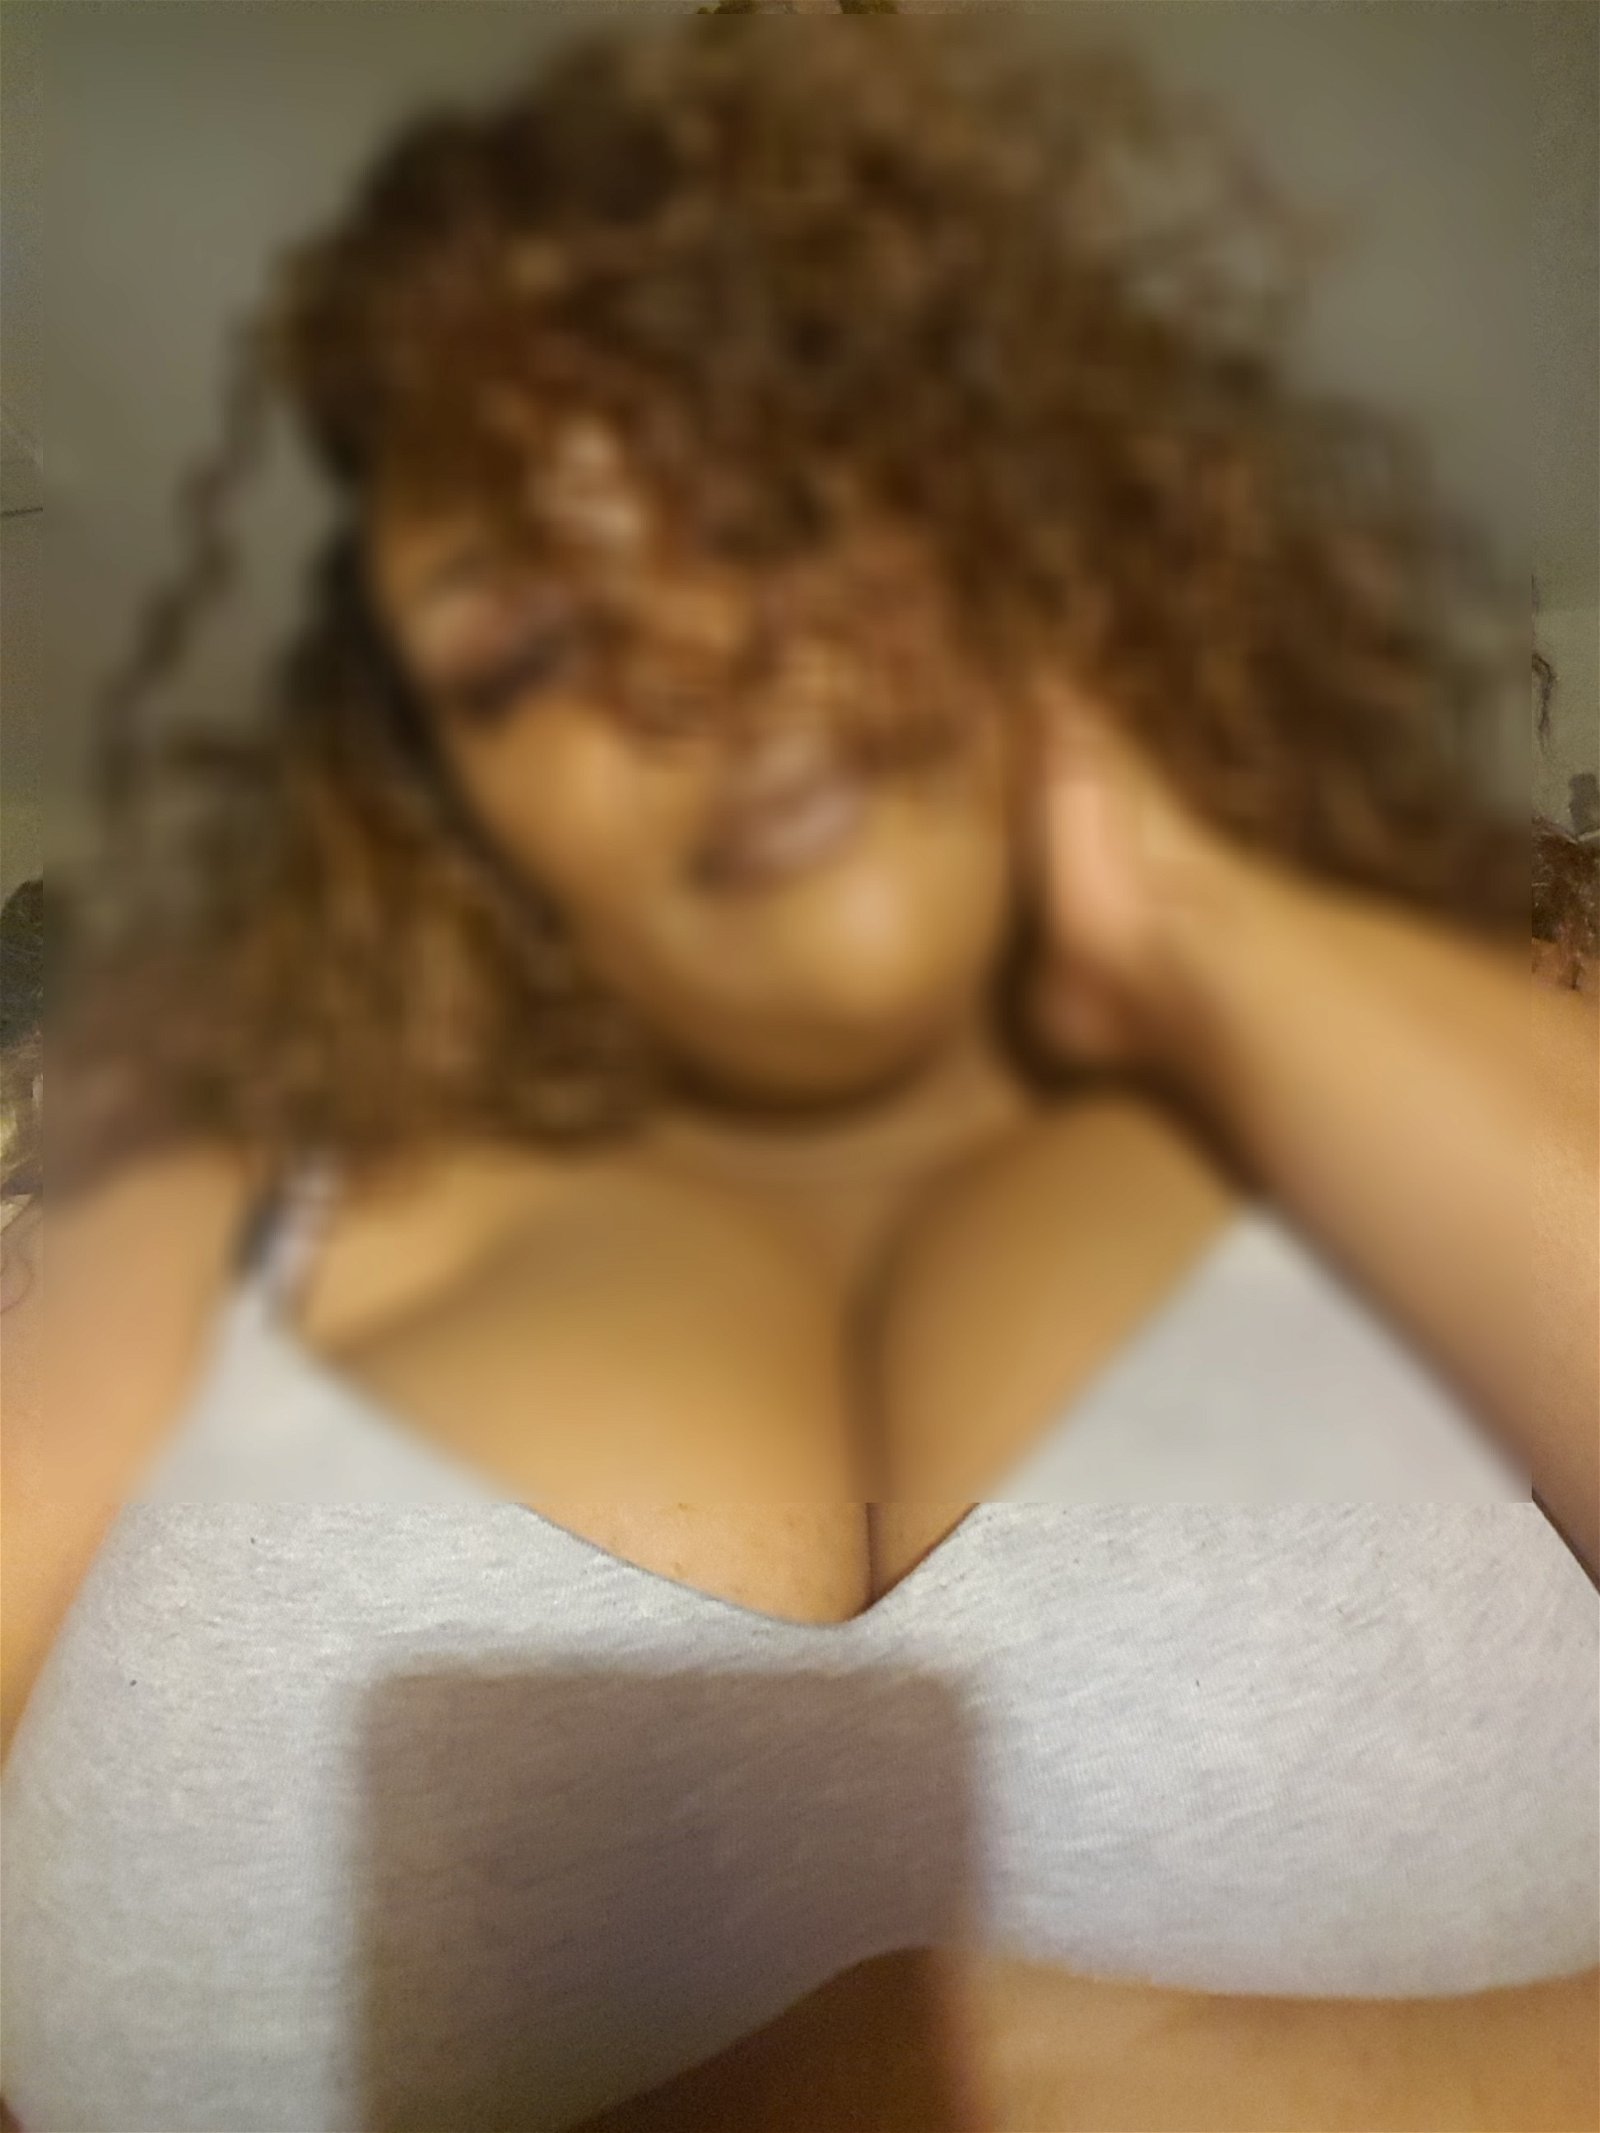 Photo by TK The Goddess with the username @TheKinkstress, who is a verified user,  December 30, 2018 at 8:08 PM. The post is about the topic BBW and the text says 'An entire mood is upon me, beloveds.💋'